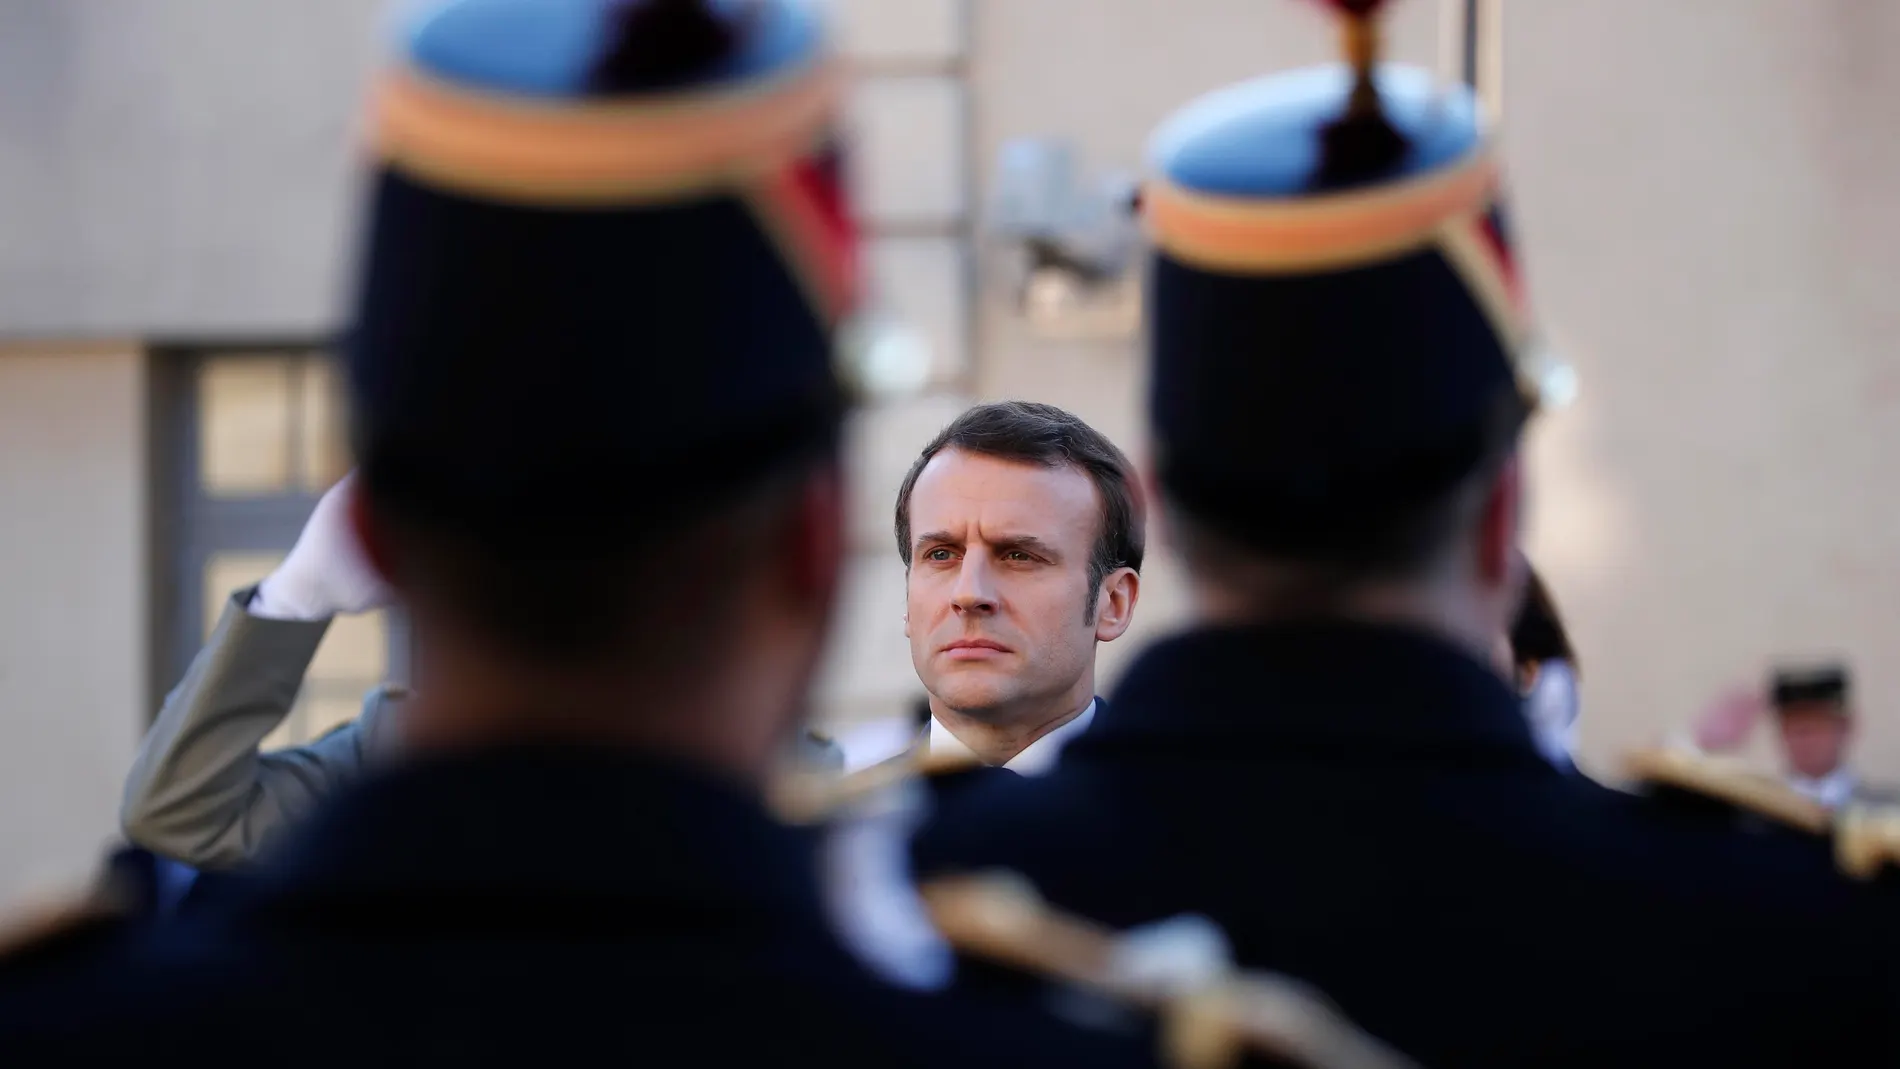 French President Macron at military school in Paris